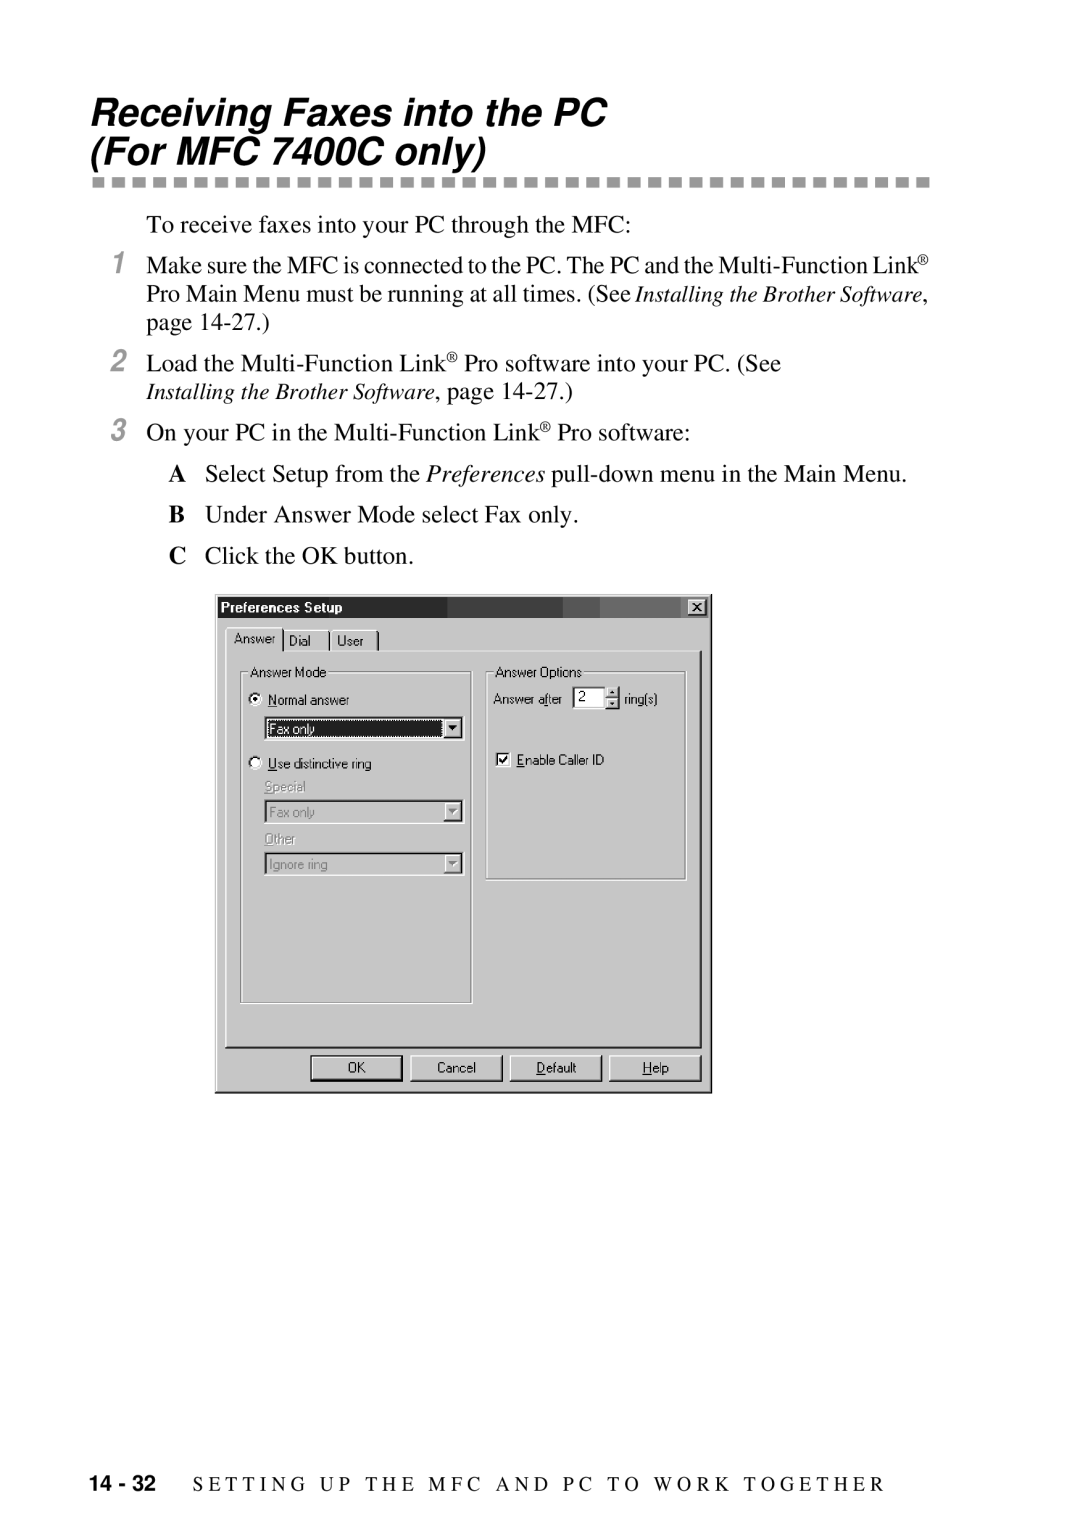 Brother MFC-7300C manual Receiving Faxes into the PC For MFC 7400C only 